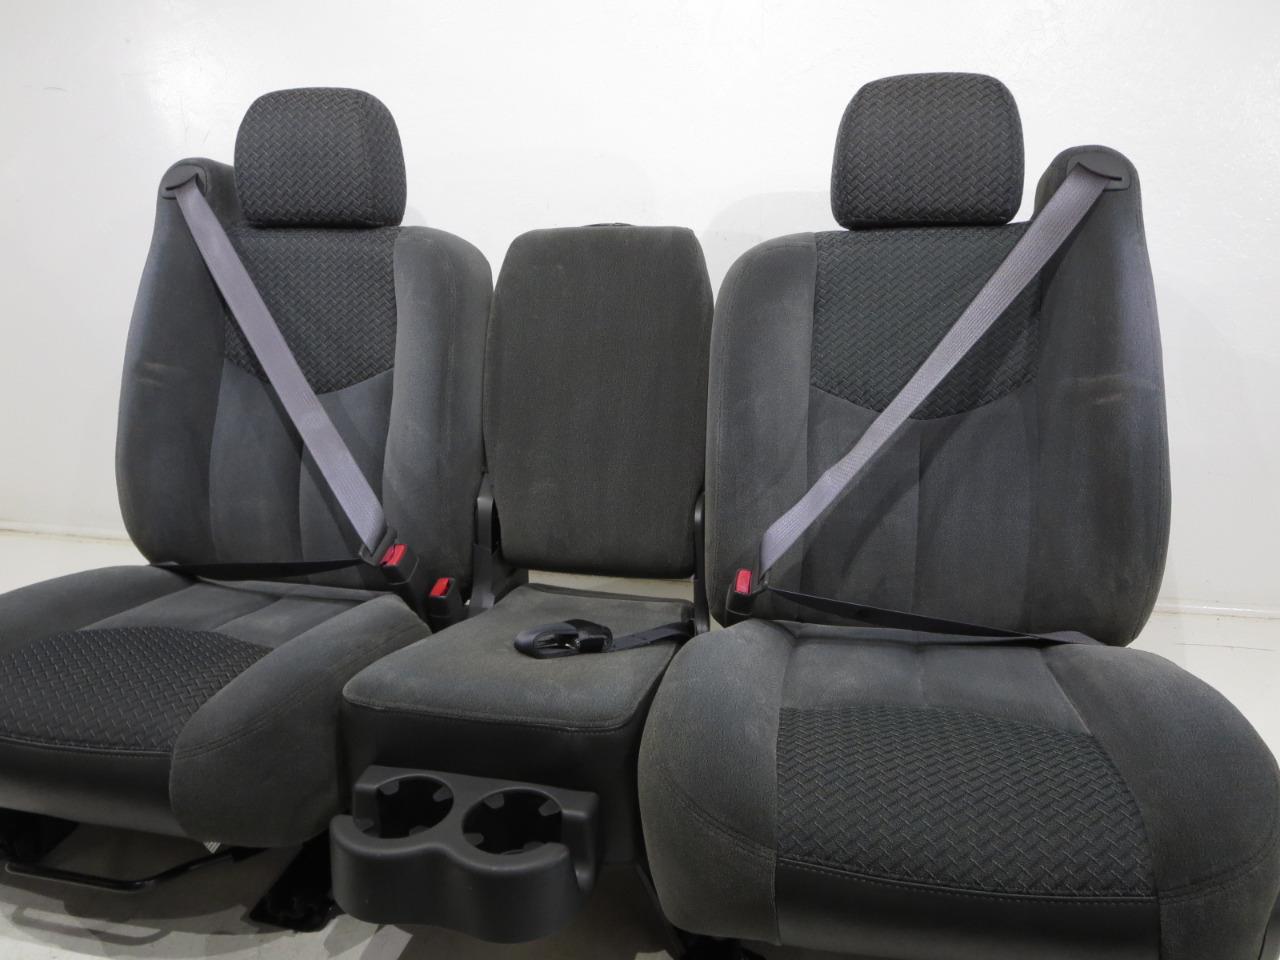 replacement gm chevy avalanche oem grey cloth front seats silverado 2003 2004 2005 2006 stock 7894i gm chevy avalanche oem grey cloth front seats silverado 2003 2004 2005 2006